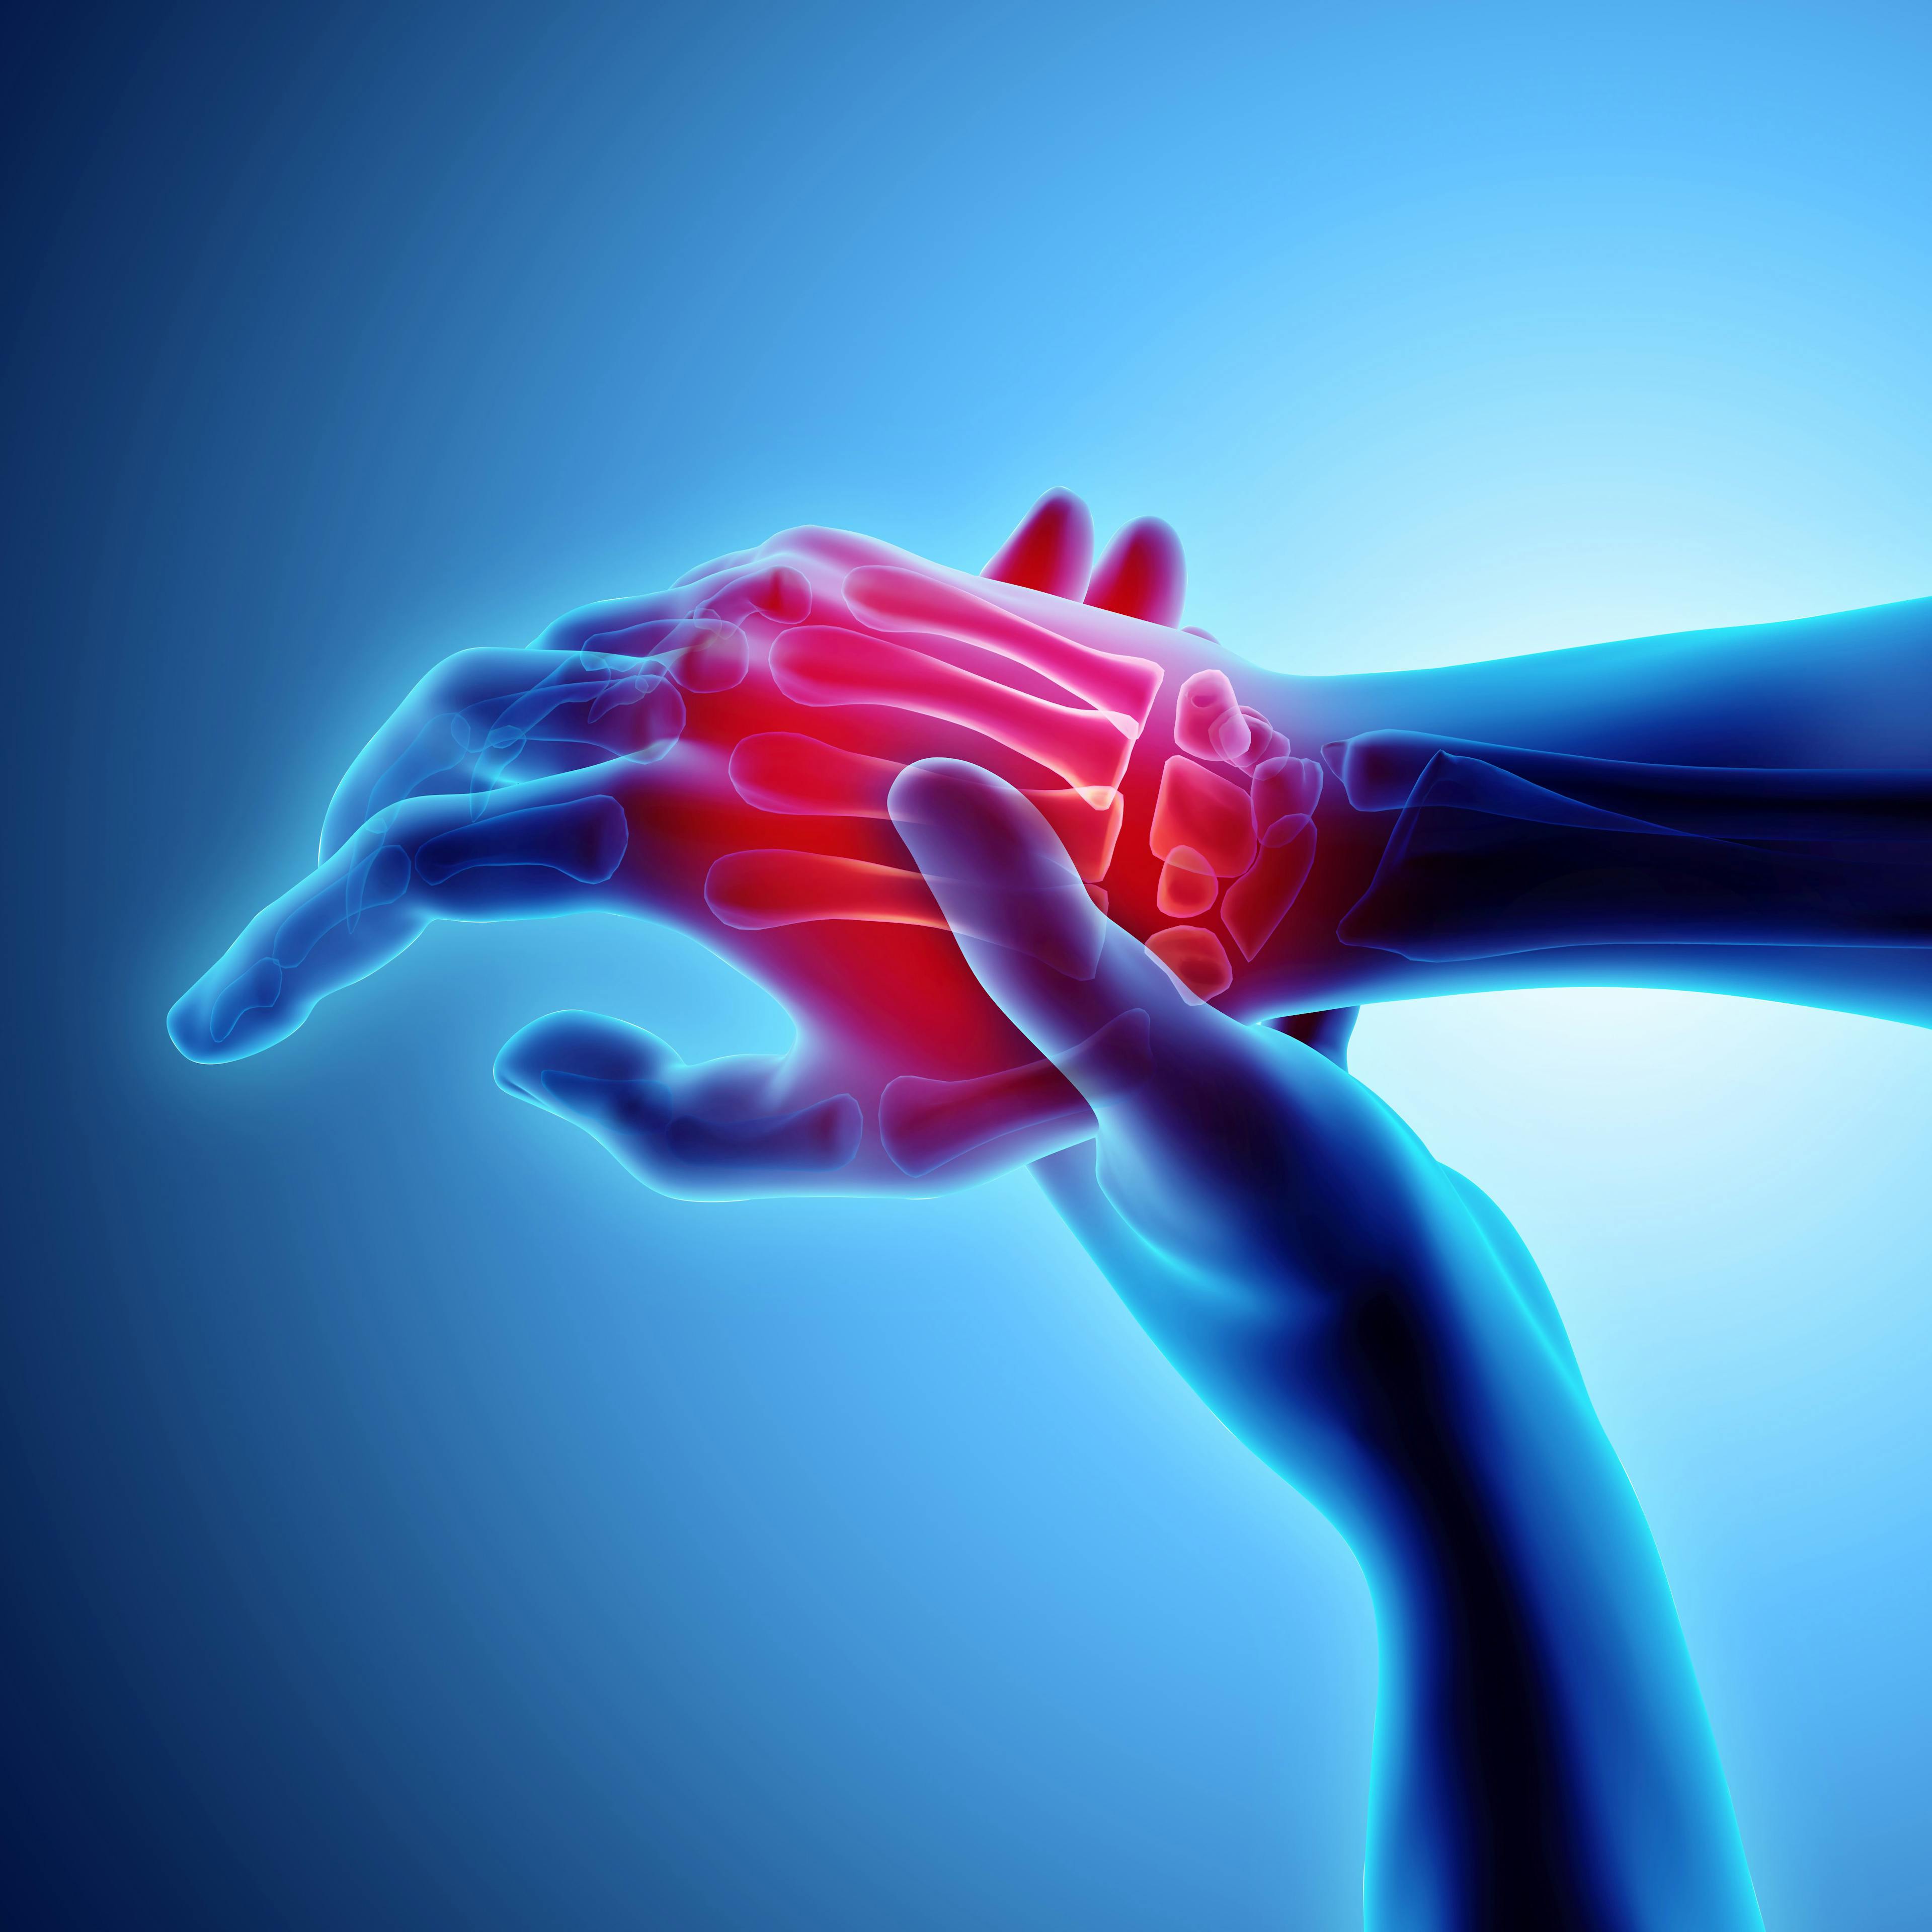 Researchers Believe KLK6 Protein May Play a Role in the Development of Psoriatic Arthritis